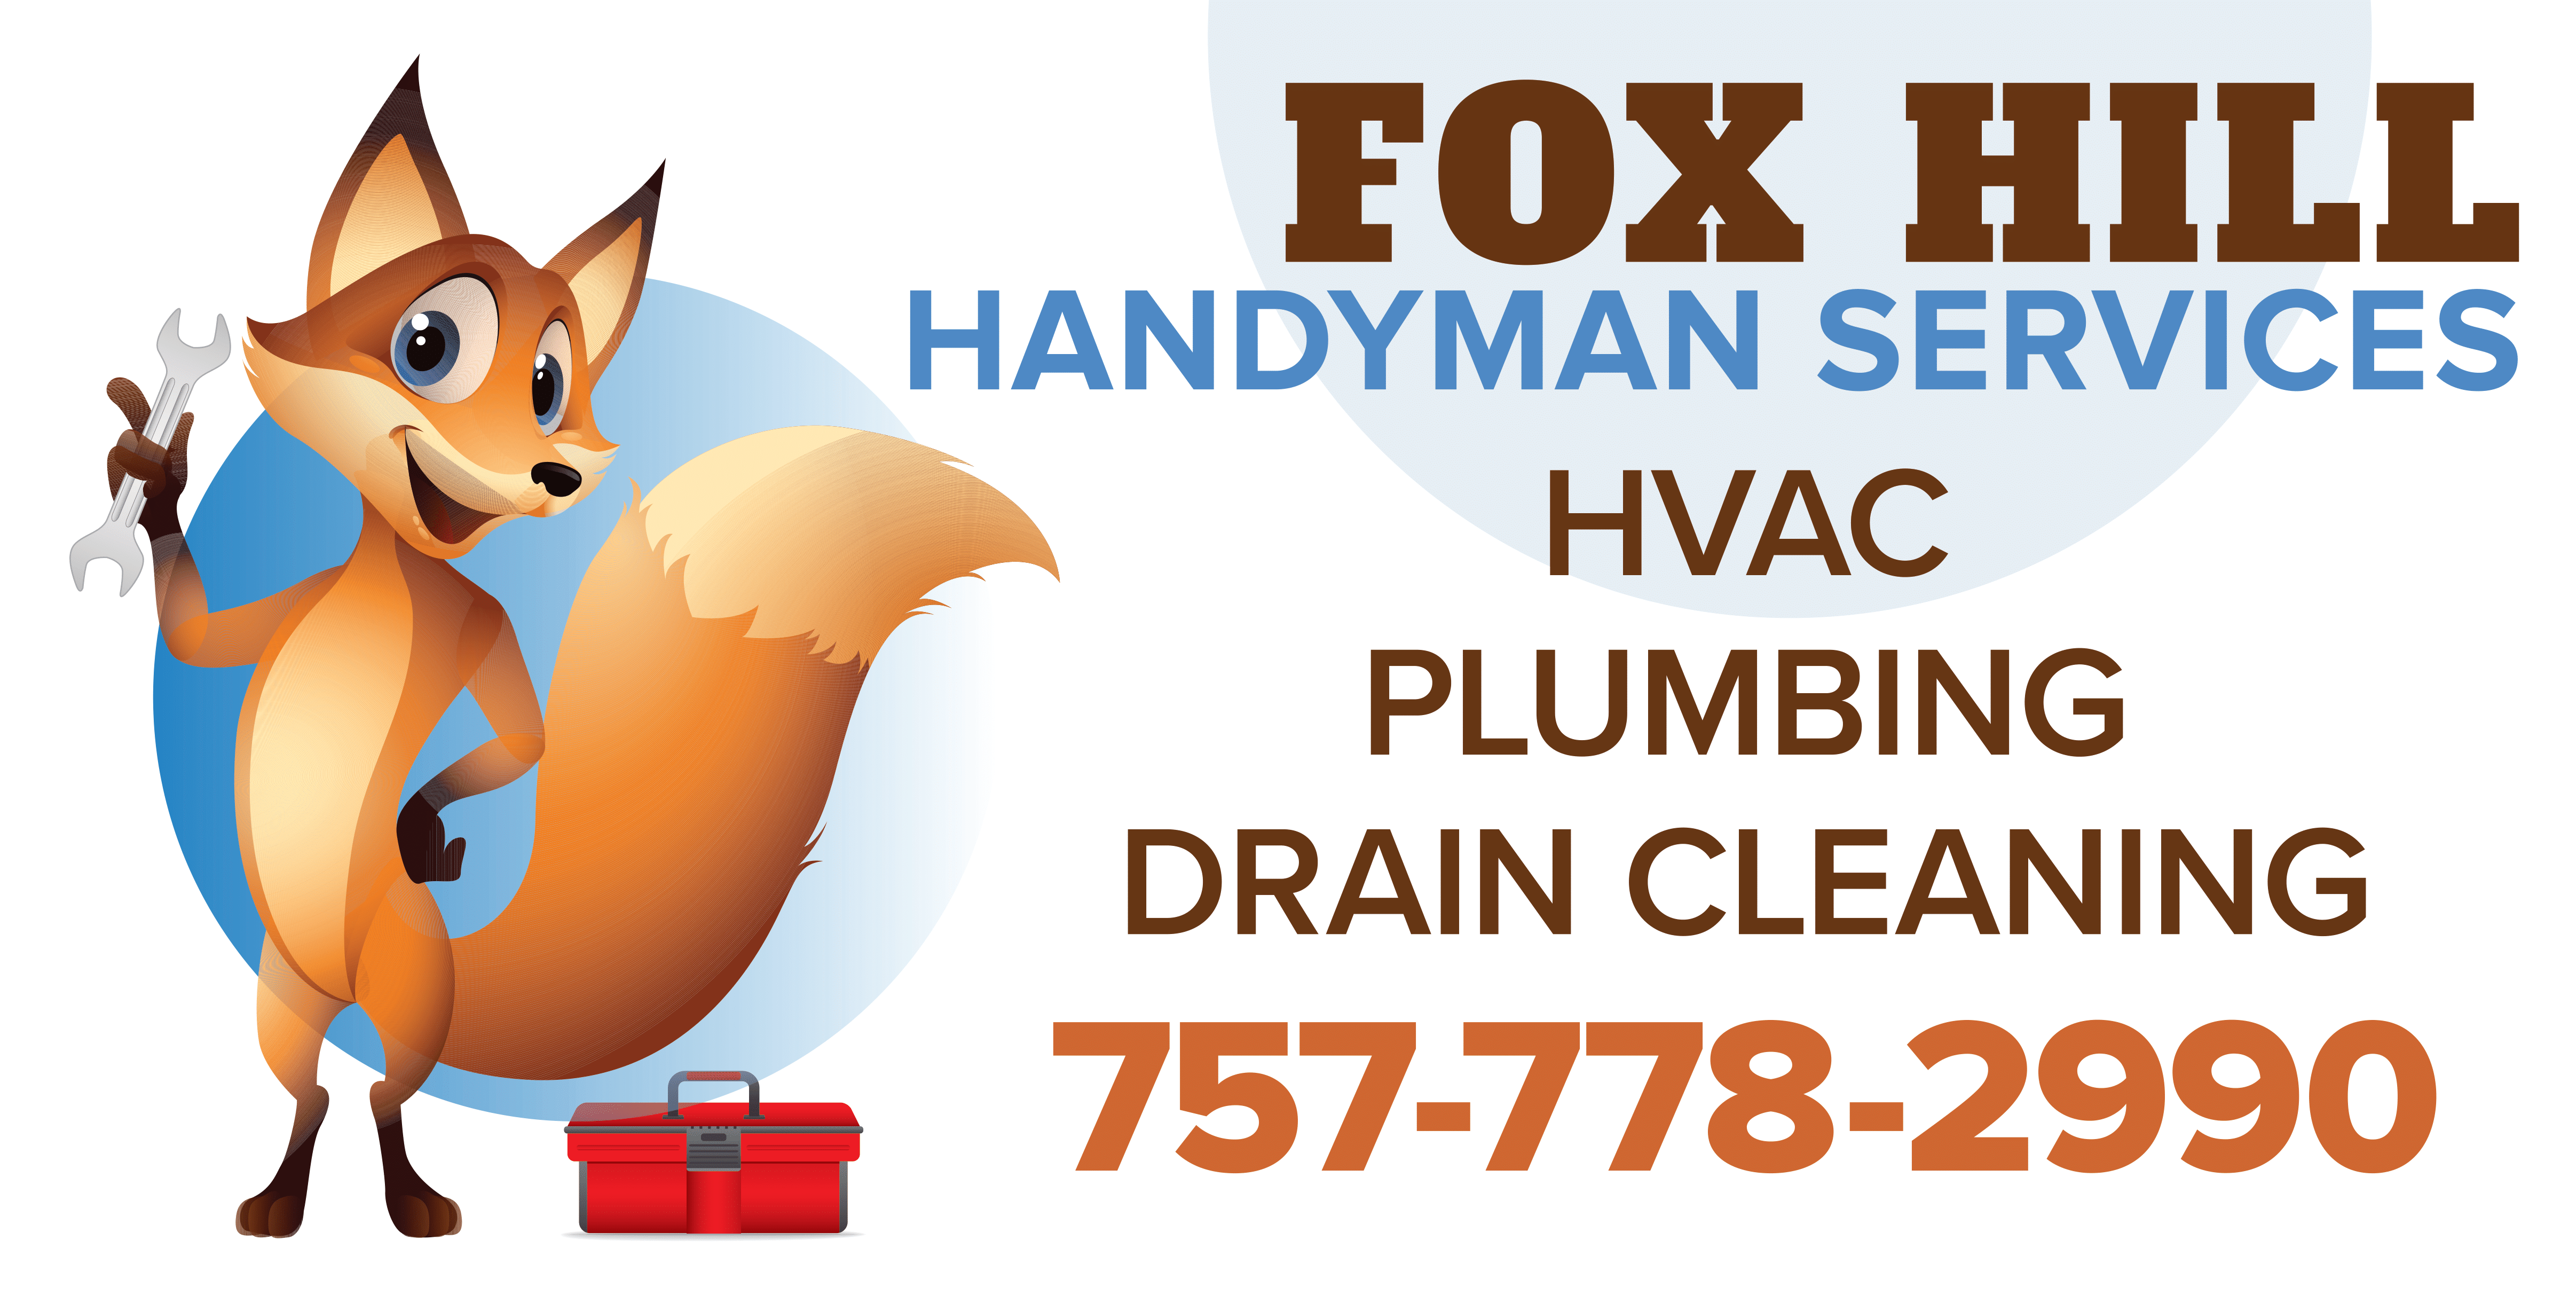 The Hamptons Drain Cleaning Service